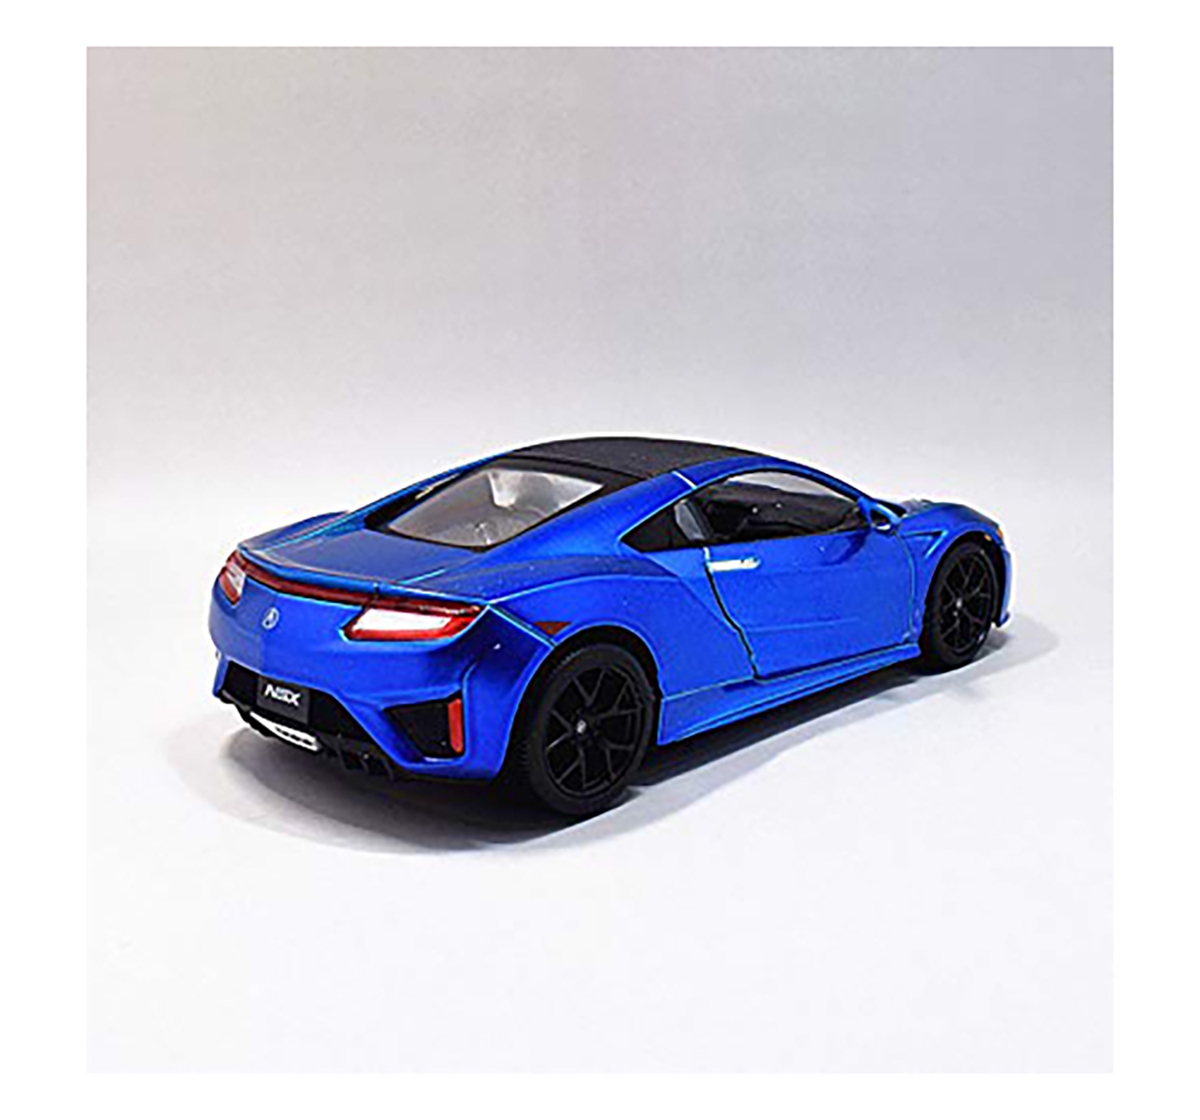 Msz | MSZ 1:31 Honda Acura NSX Car with Light and Sound for Kids age 3Y+ (Blue) 3